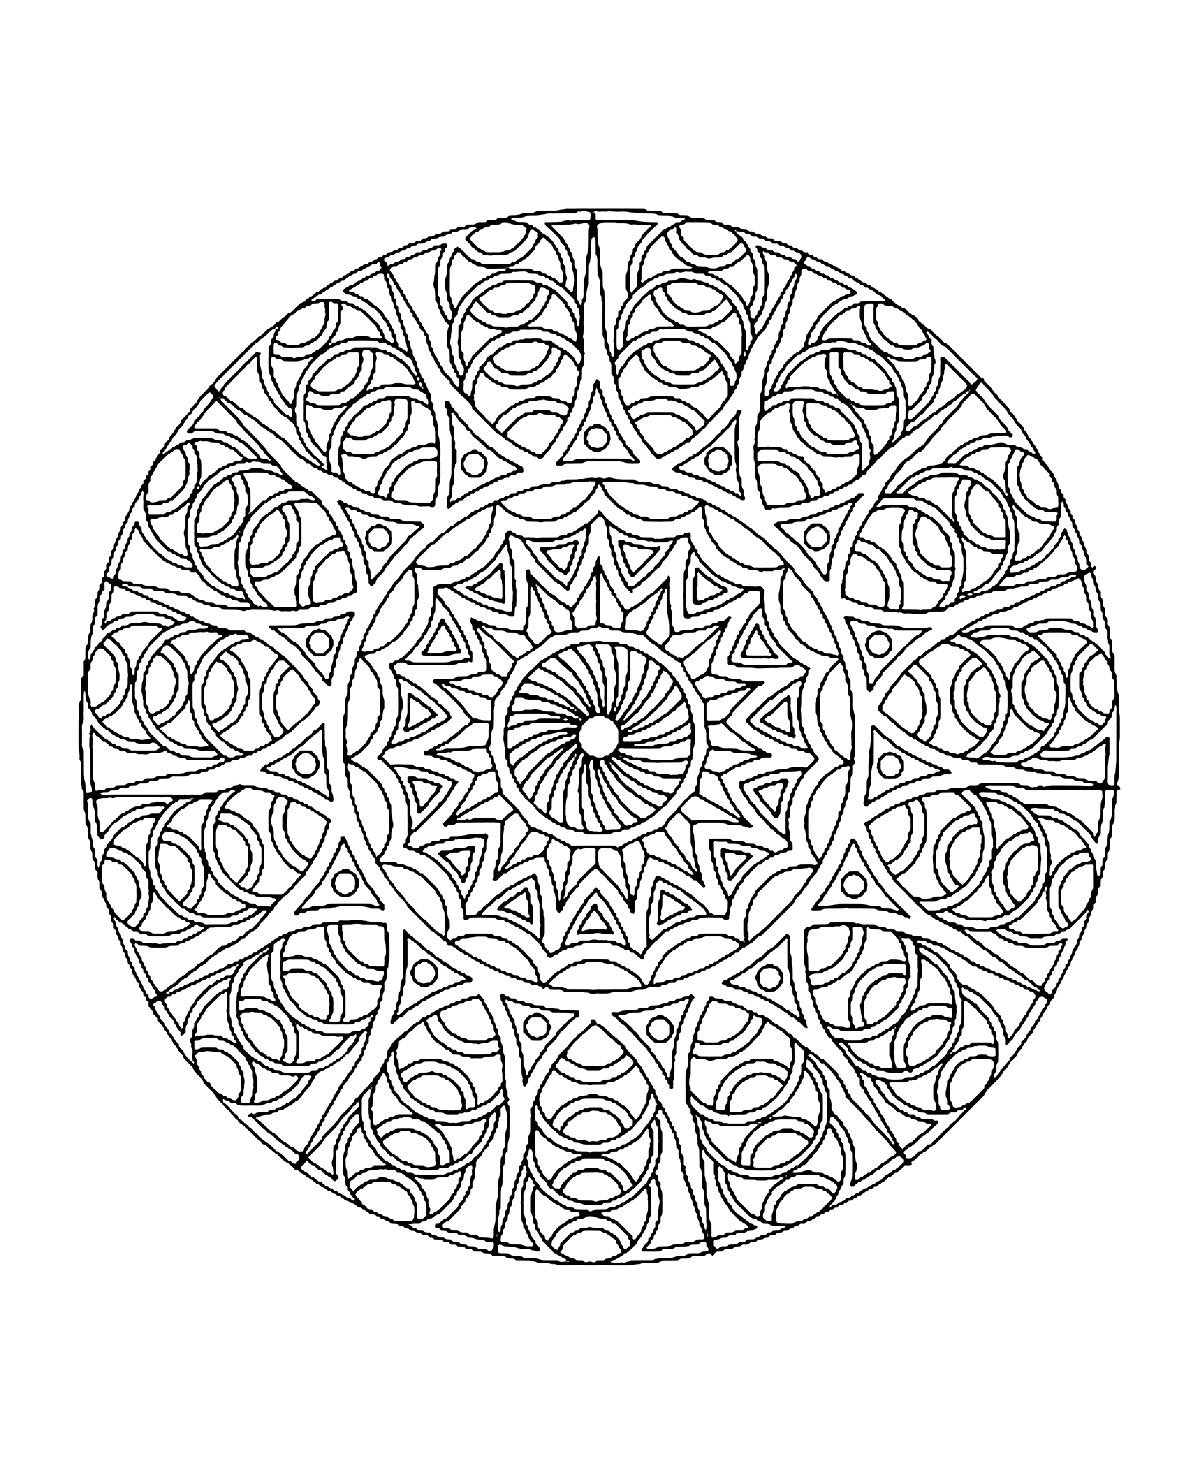 Mandala to color difficult - 4